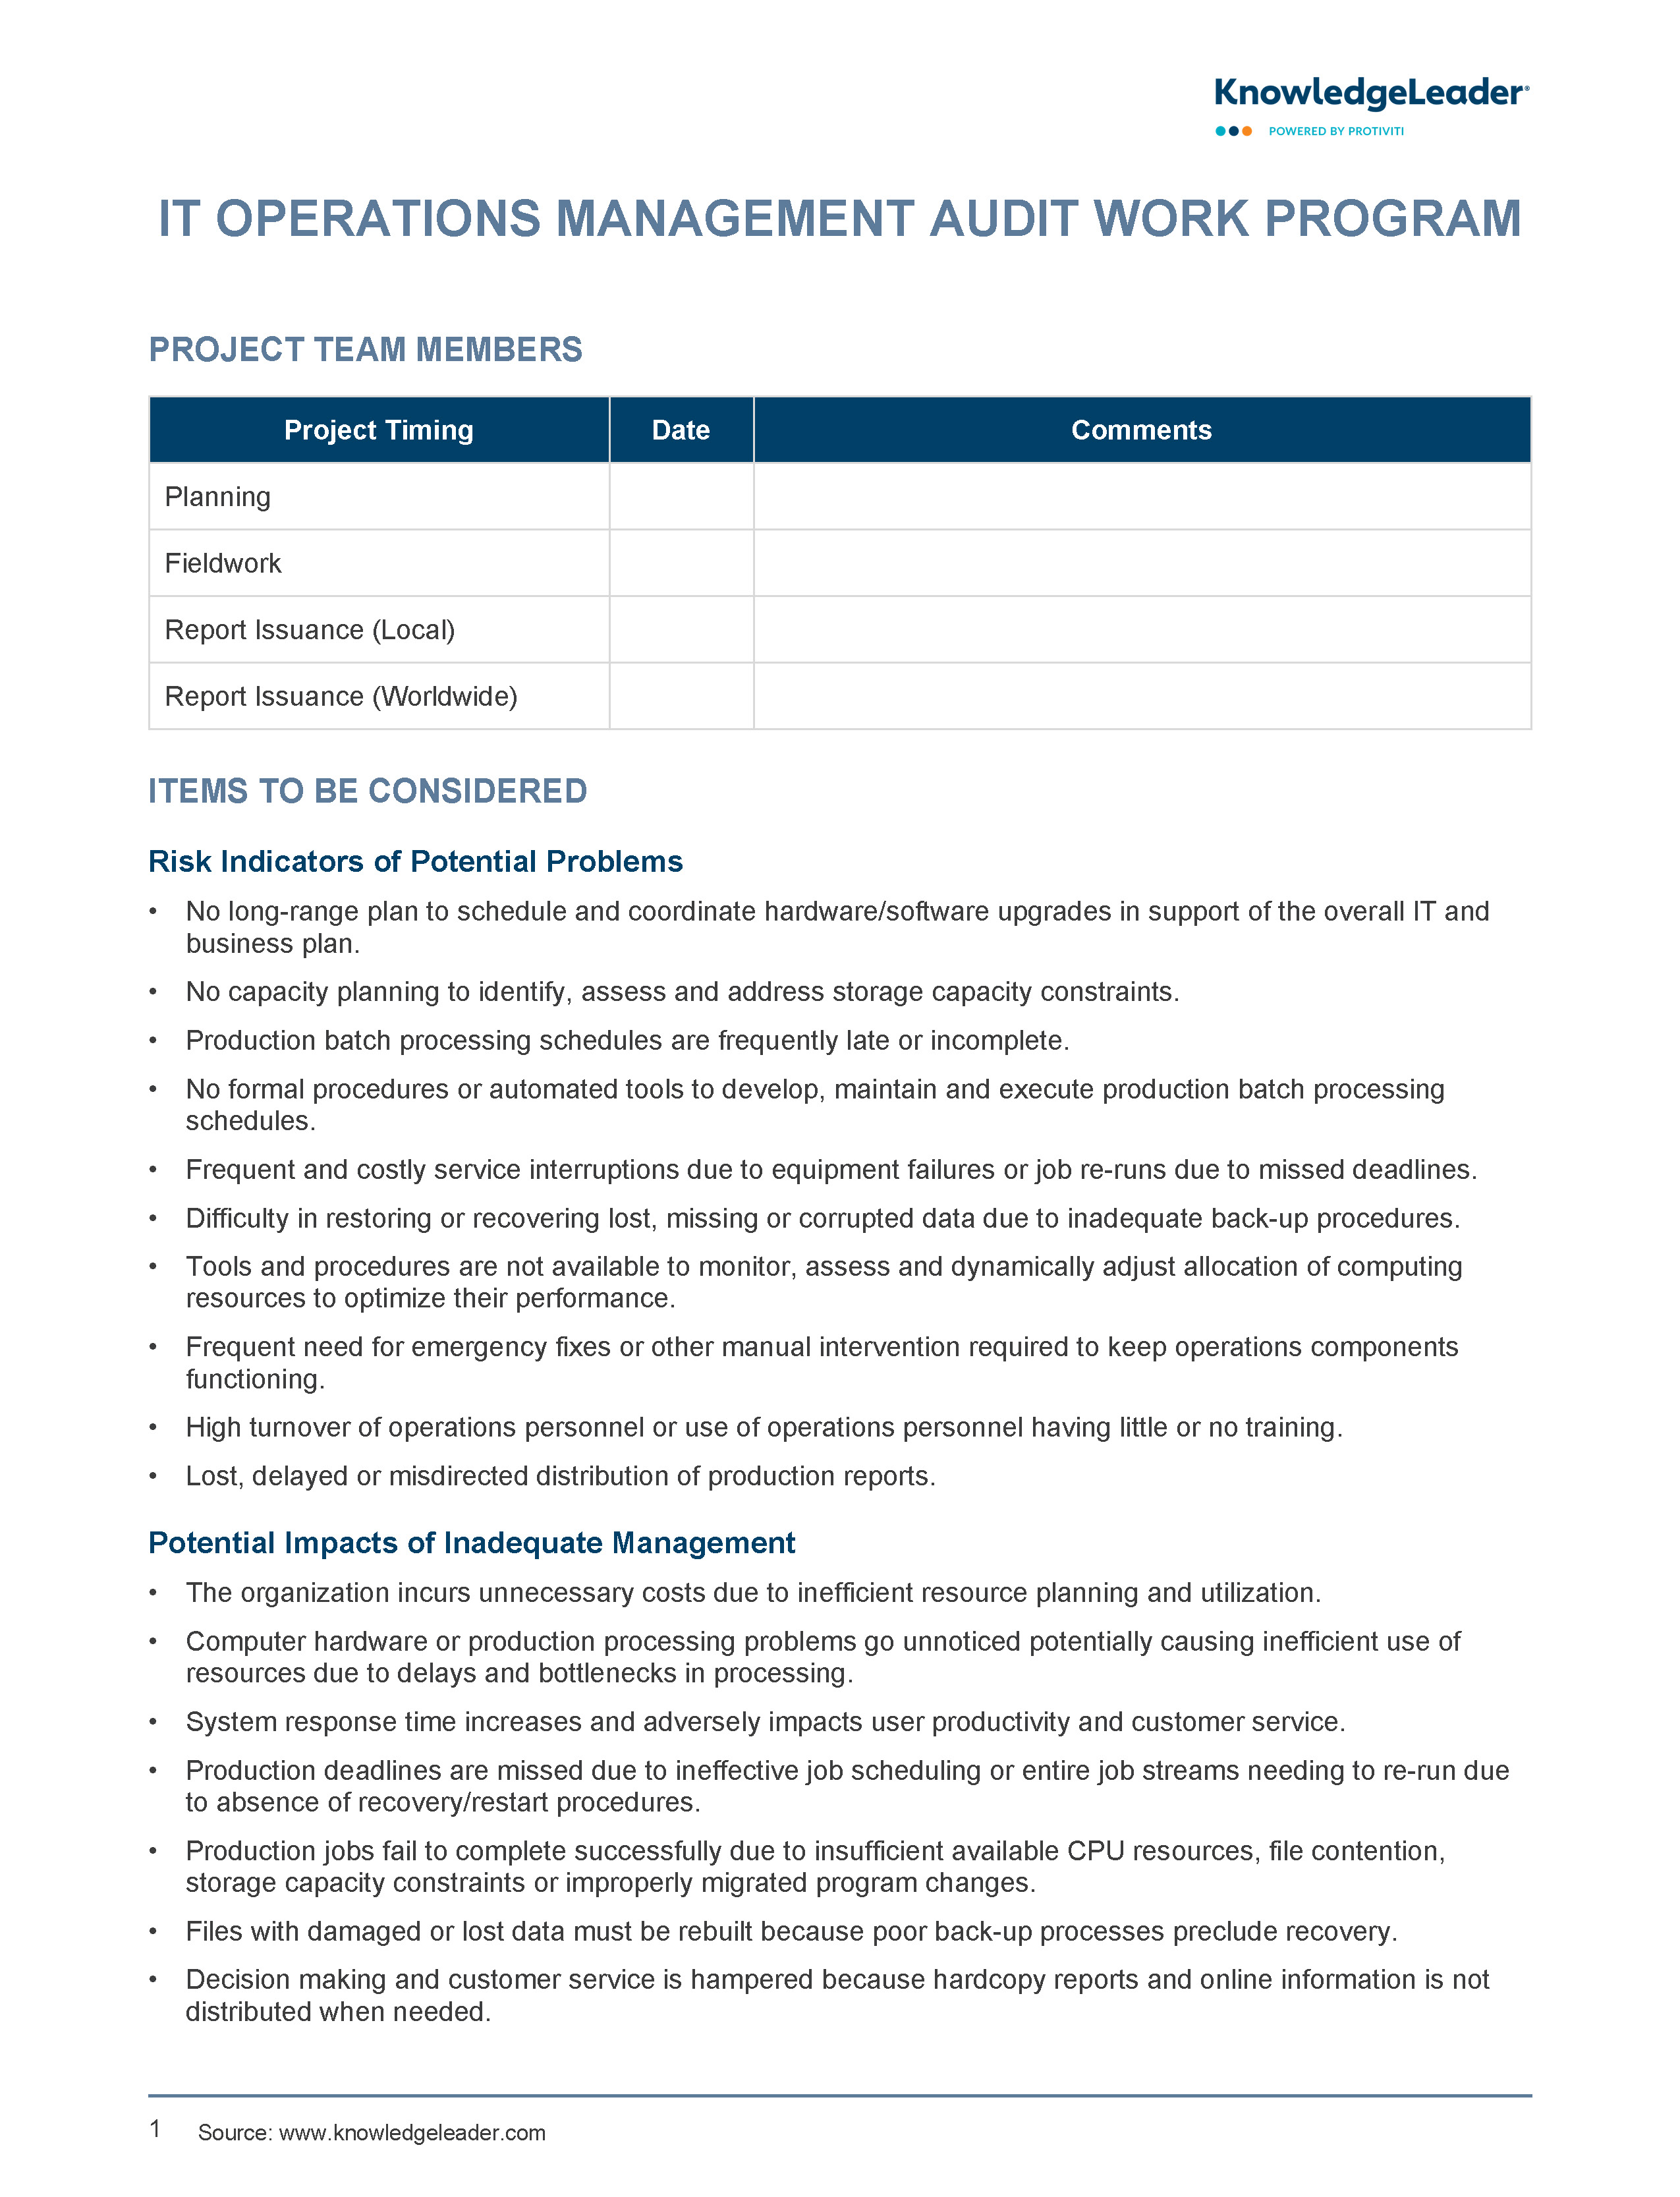 Screenshot of the first page of IT Operation Management Audit Work Program